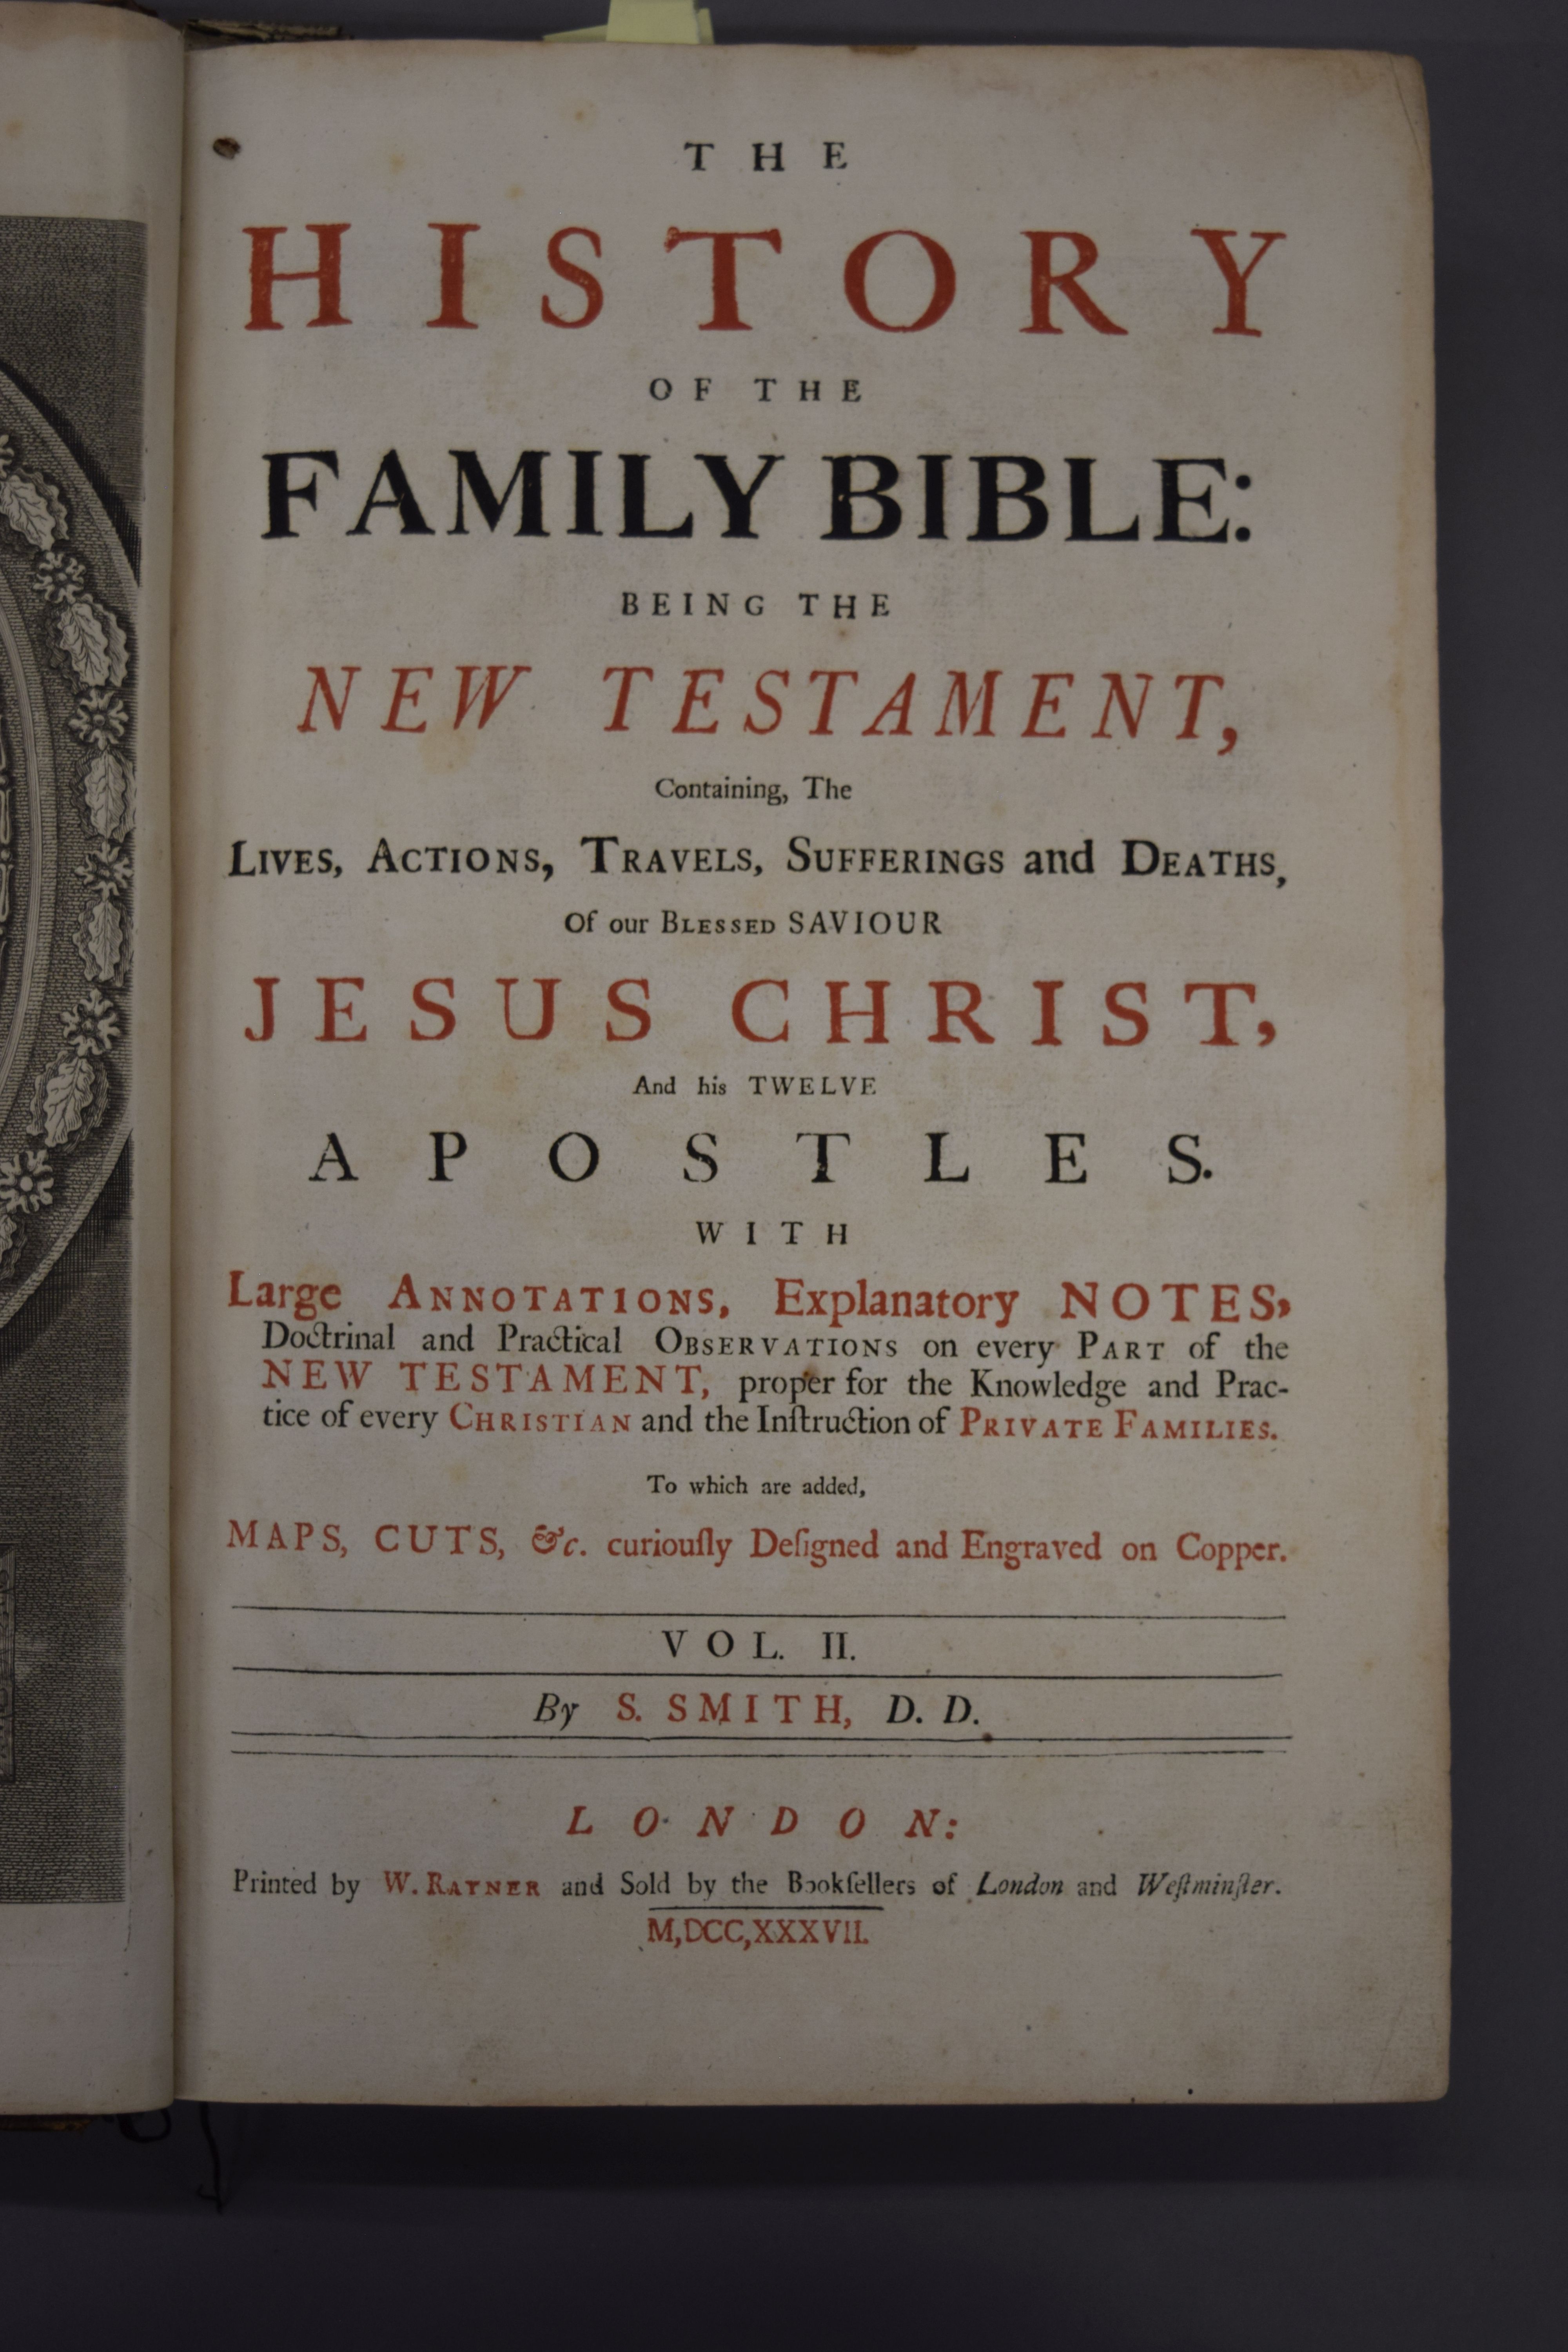 S Smith, The History of the Family Bible Being The New Testament 1737, volume two, - Image 5 of 6